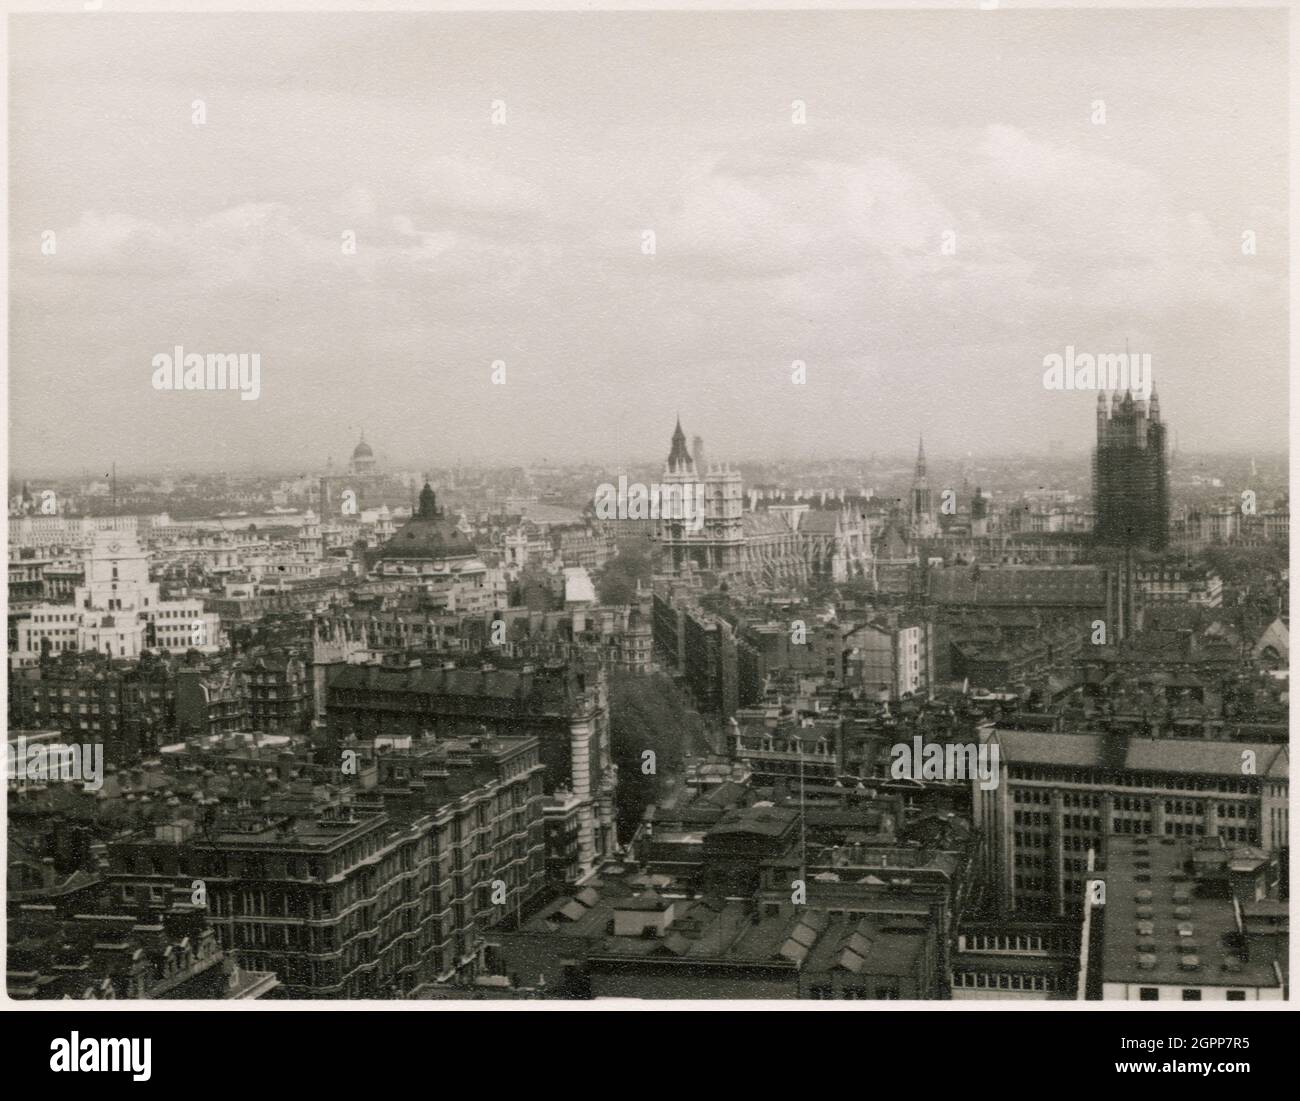 City of Westminster, Greater London Authority, 1950-1955. A view looking north-east across Westminster from the tower of Westminster Cathedral, showing St James' Park station, the Methodist Central Hall, Westminster Abbey and Victoria Tower of the Houses of Parliament. The campanile or tower of Westminster Cathedral is 284ft tall, and has a viewing gallery near its top. The Rose Tower of the Houses of Parliament, shown on the right of this photograph, was restored between 1936 and the early 1950s. Stock Photo